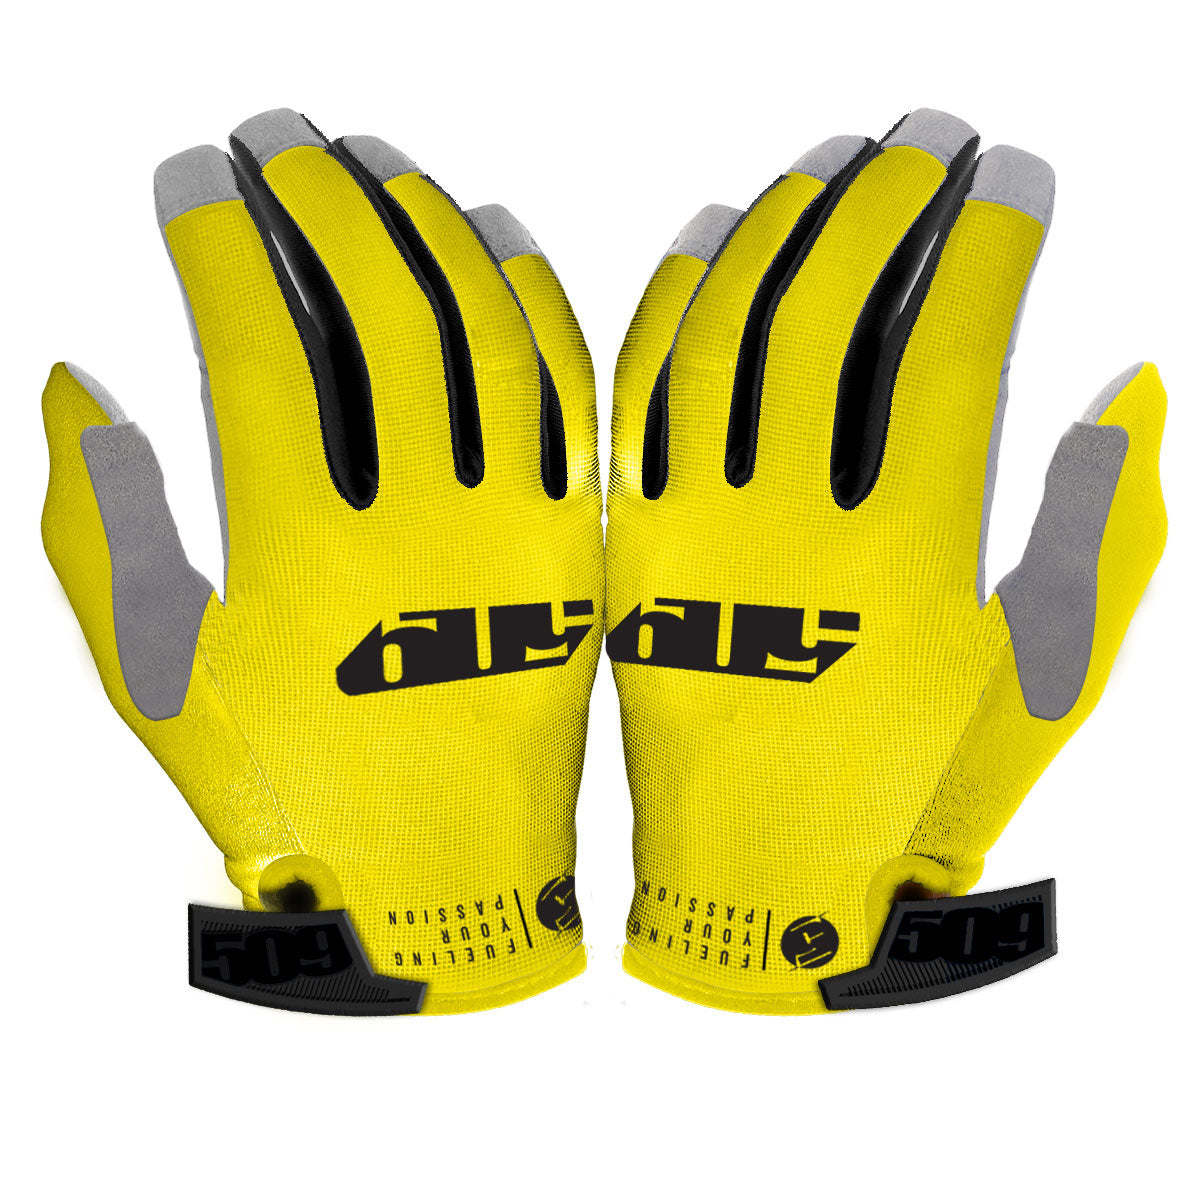 509 LOW 5 GLOVES   - F07000800 - The Parts Lodge